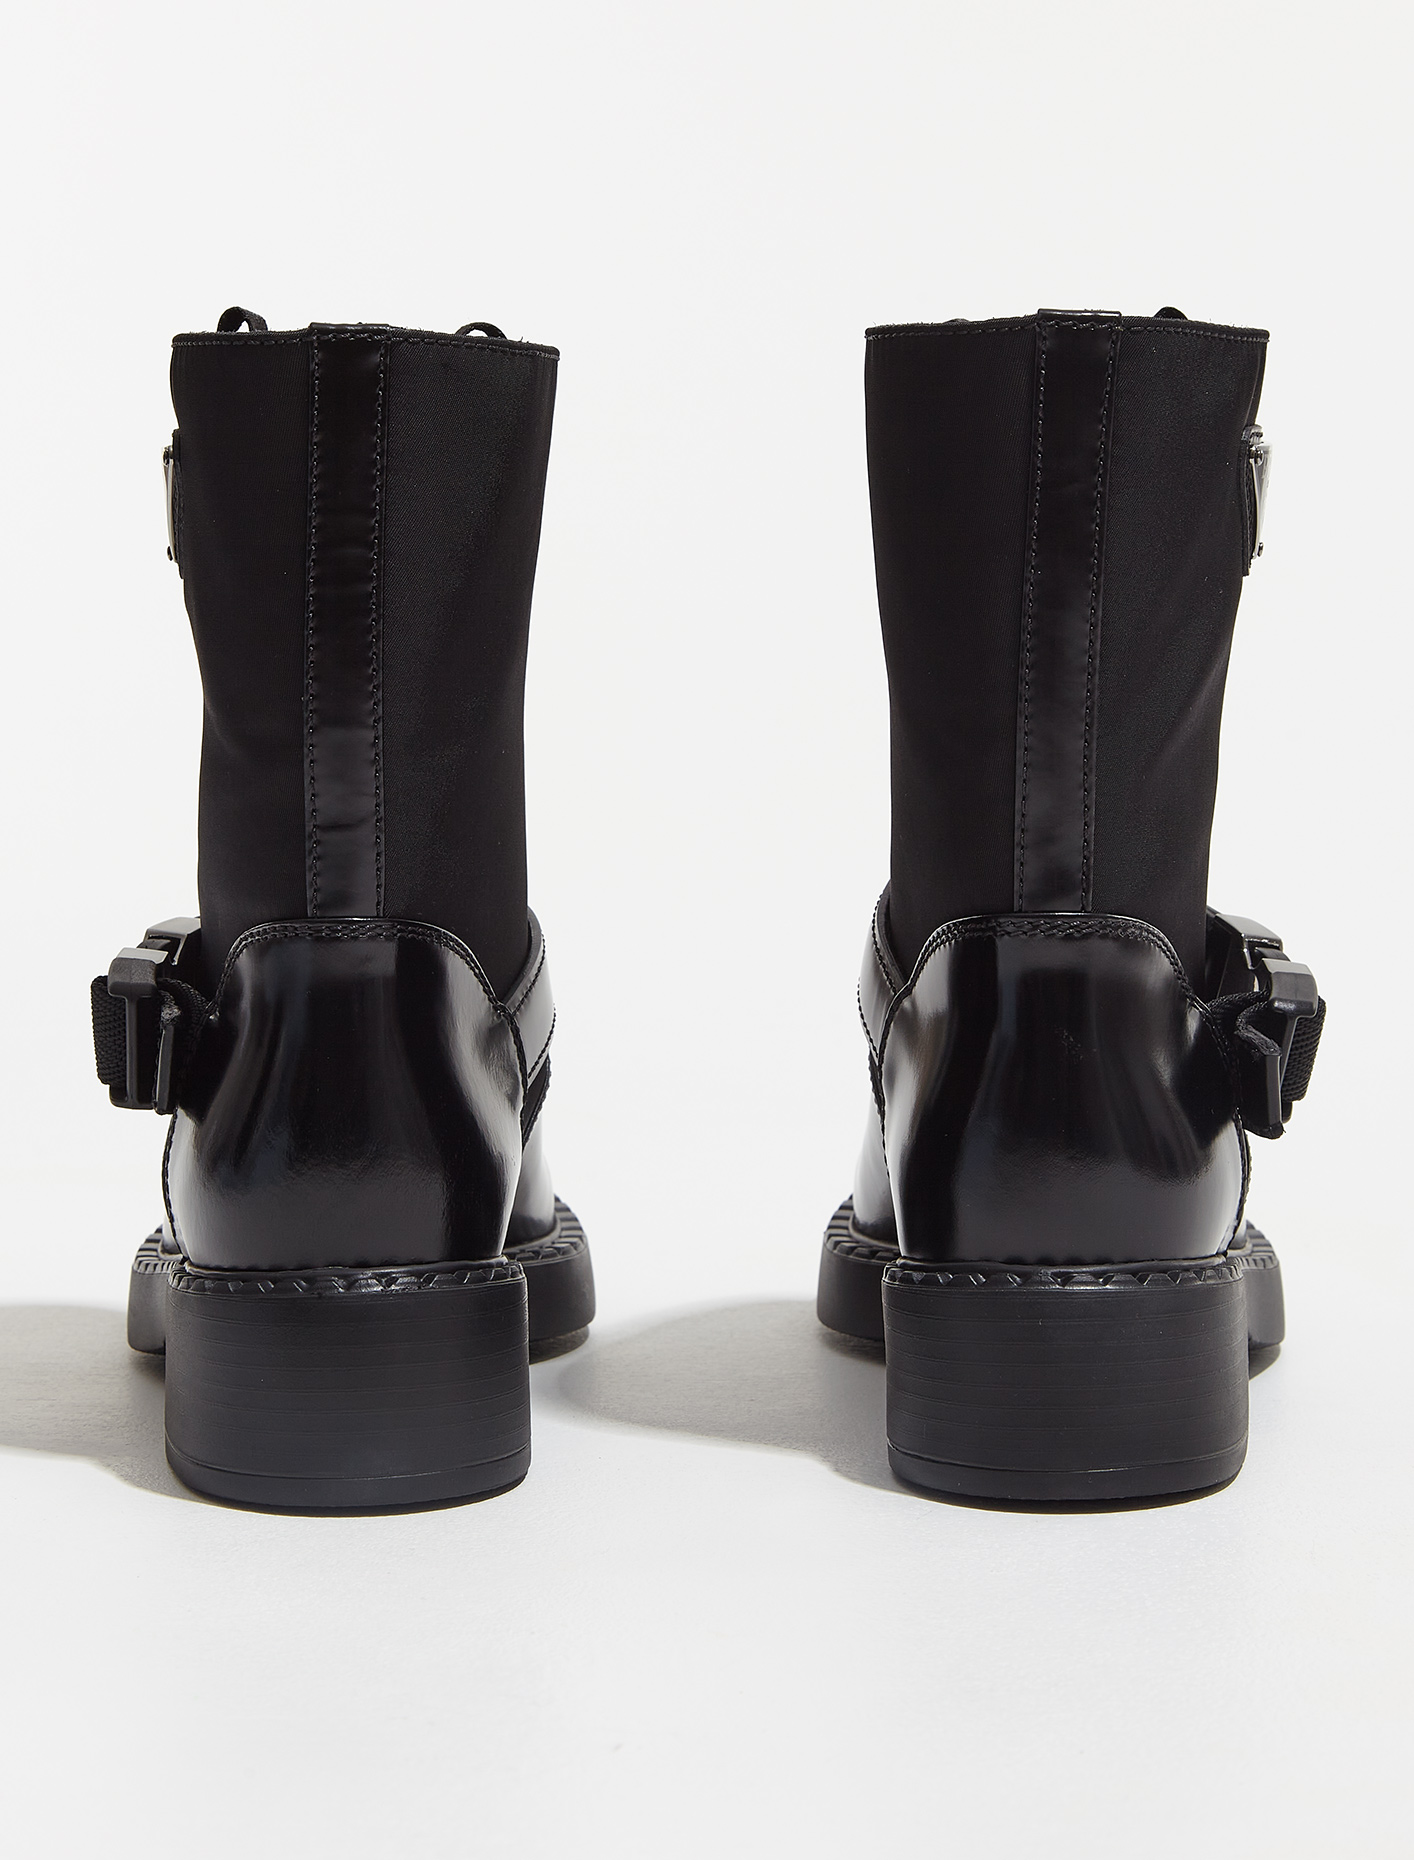 Prada Brushed Leather and Re-Nylon Buckled Booties in Black | Voo 